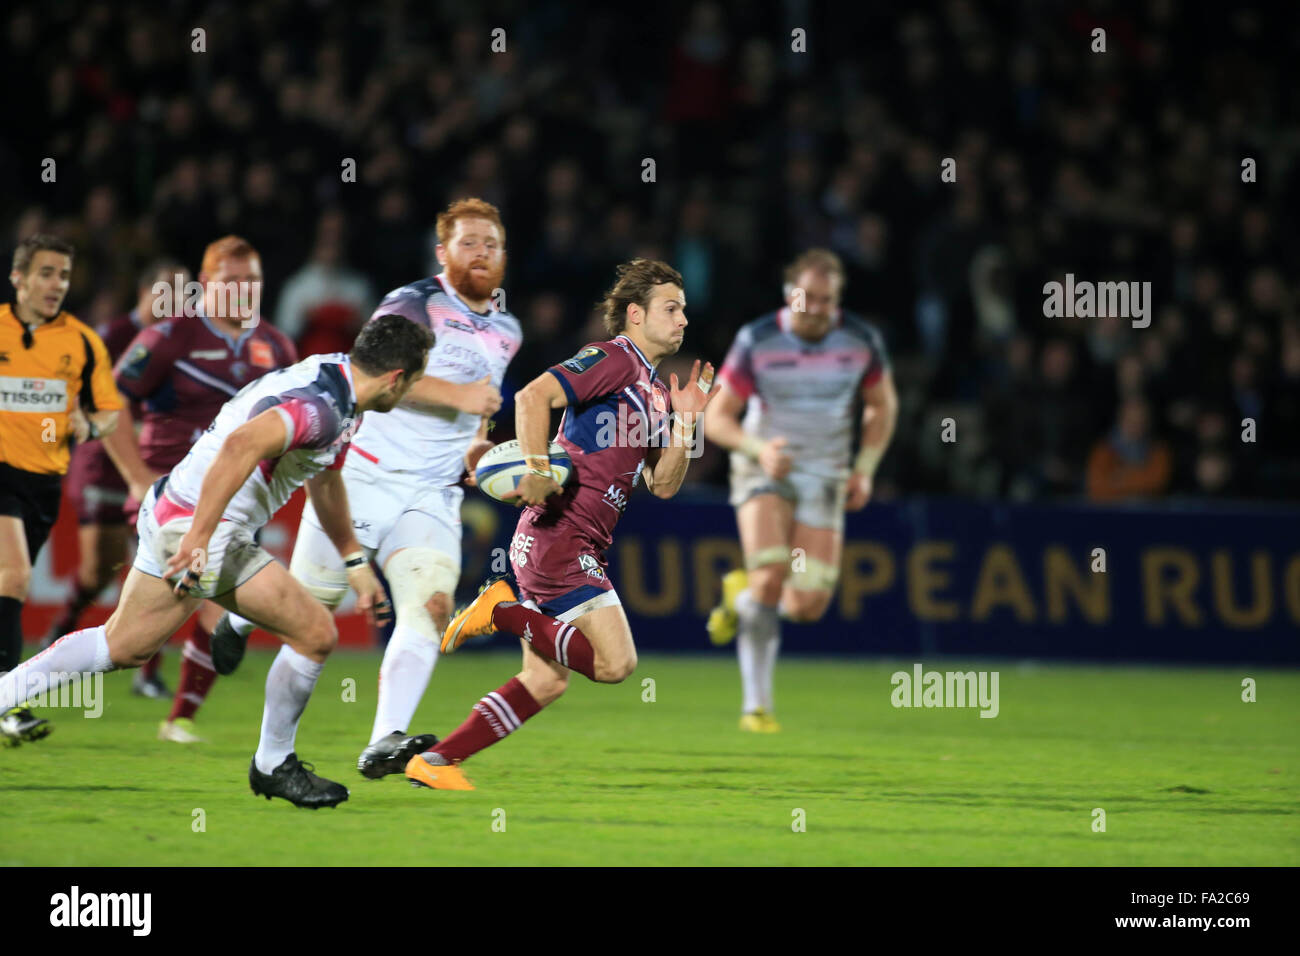 Bordeaux, France. 19th Dec, 2015. European Rugby Champions Cup. Bordeaux Begles versus Ospreys. lesgourgues breaks tackles to gain ground © Action Plus Sports/Alamy Live News Stock Photo